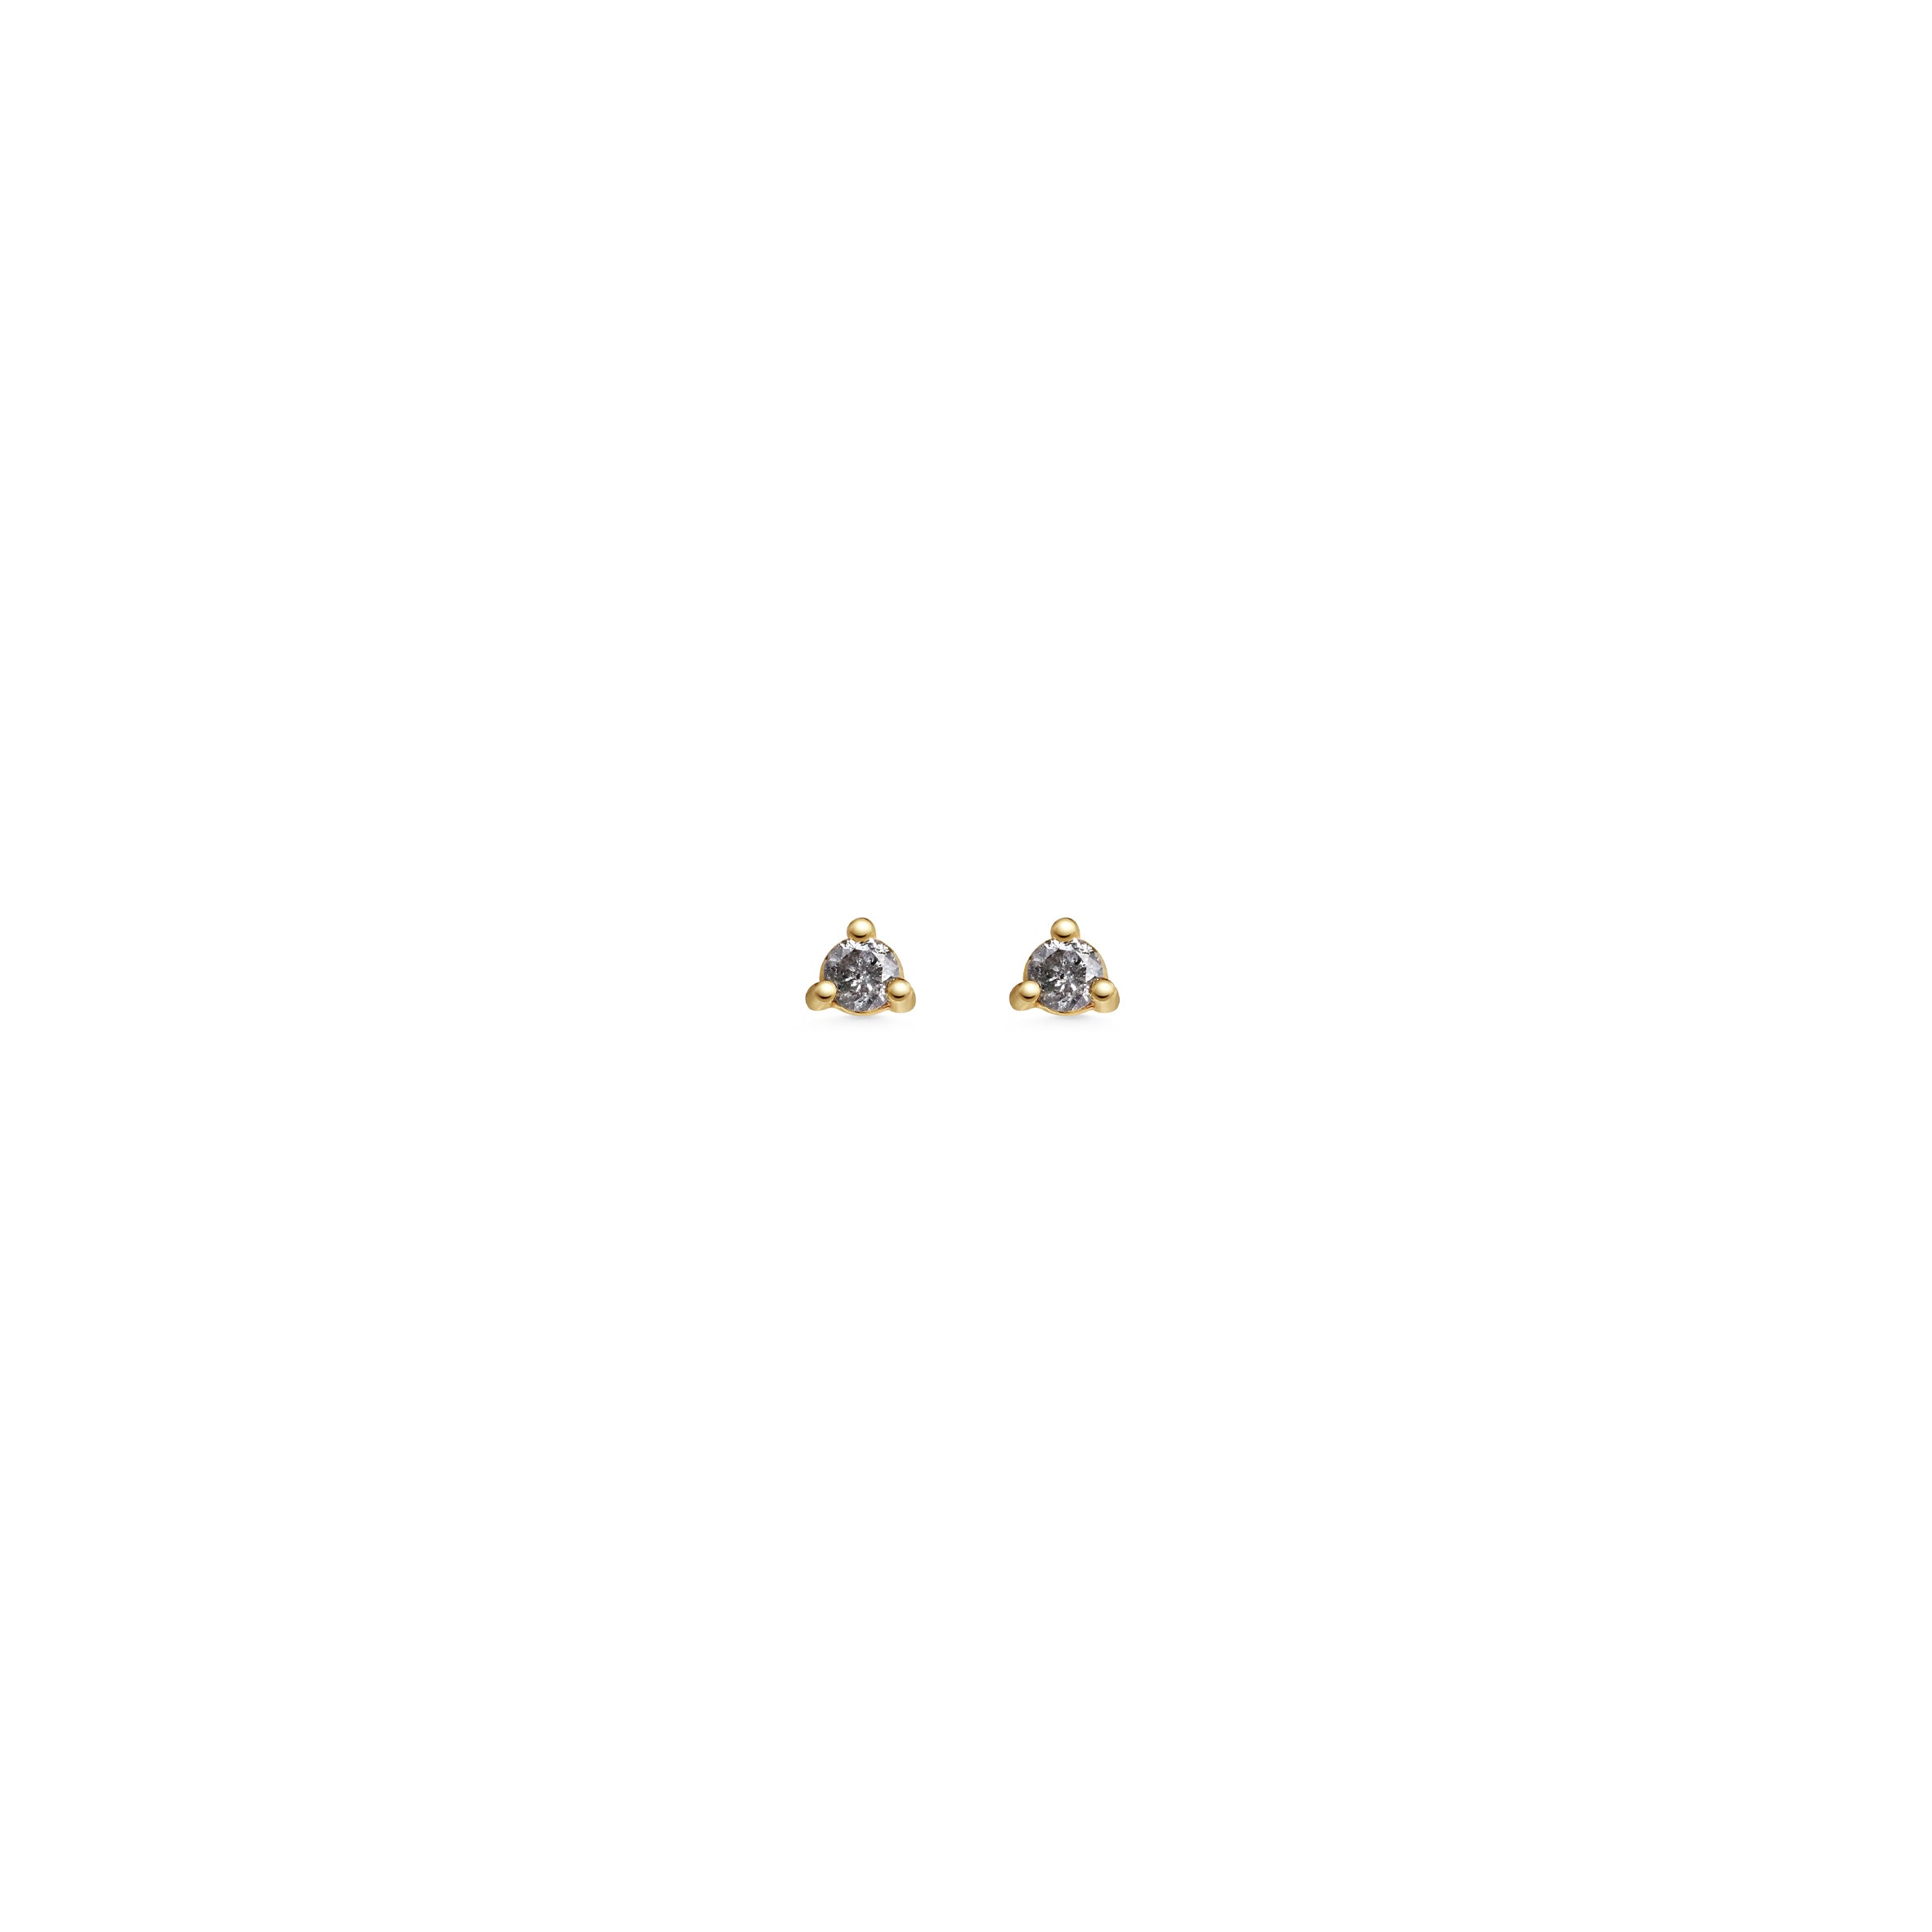 The 2mm Round Grey Diamond Stud Earrings by East London jeweller Rachel Boston | Discover our collections of unique and timeless engagement rings, wedding rings, and modern fine jewellery.